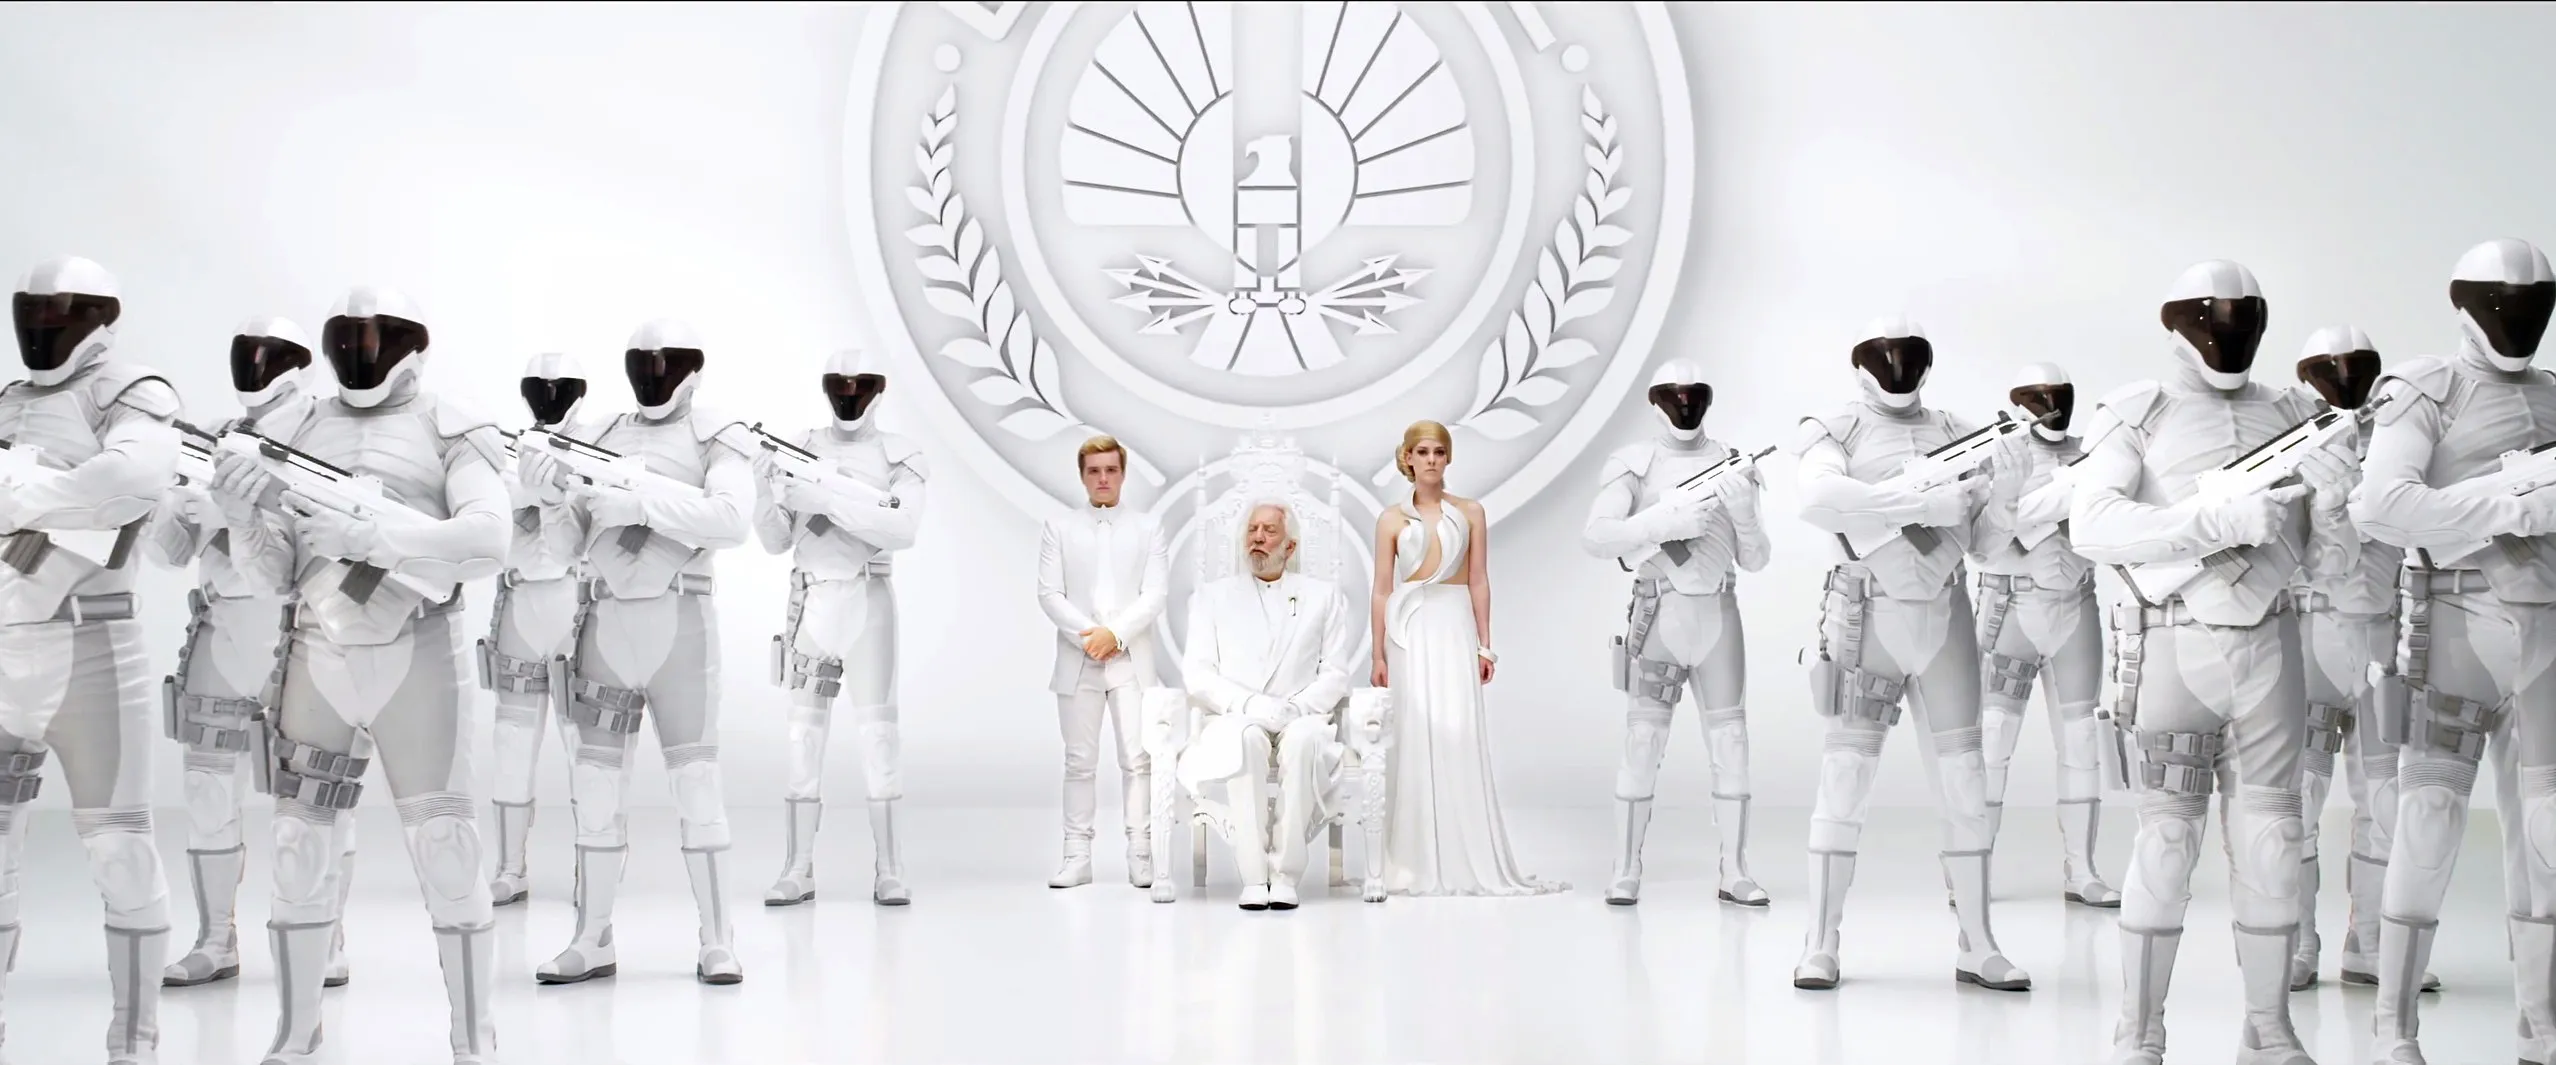 Lawrence, Francis. The Hunger Games: Mockingjay Part 1, 2014